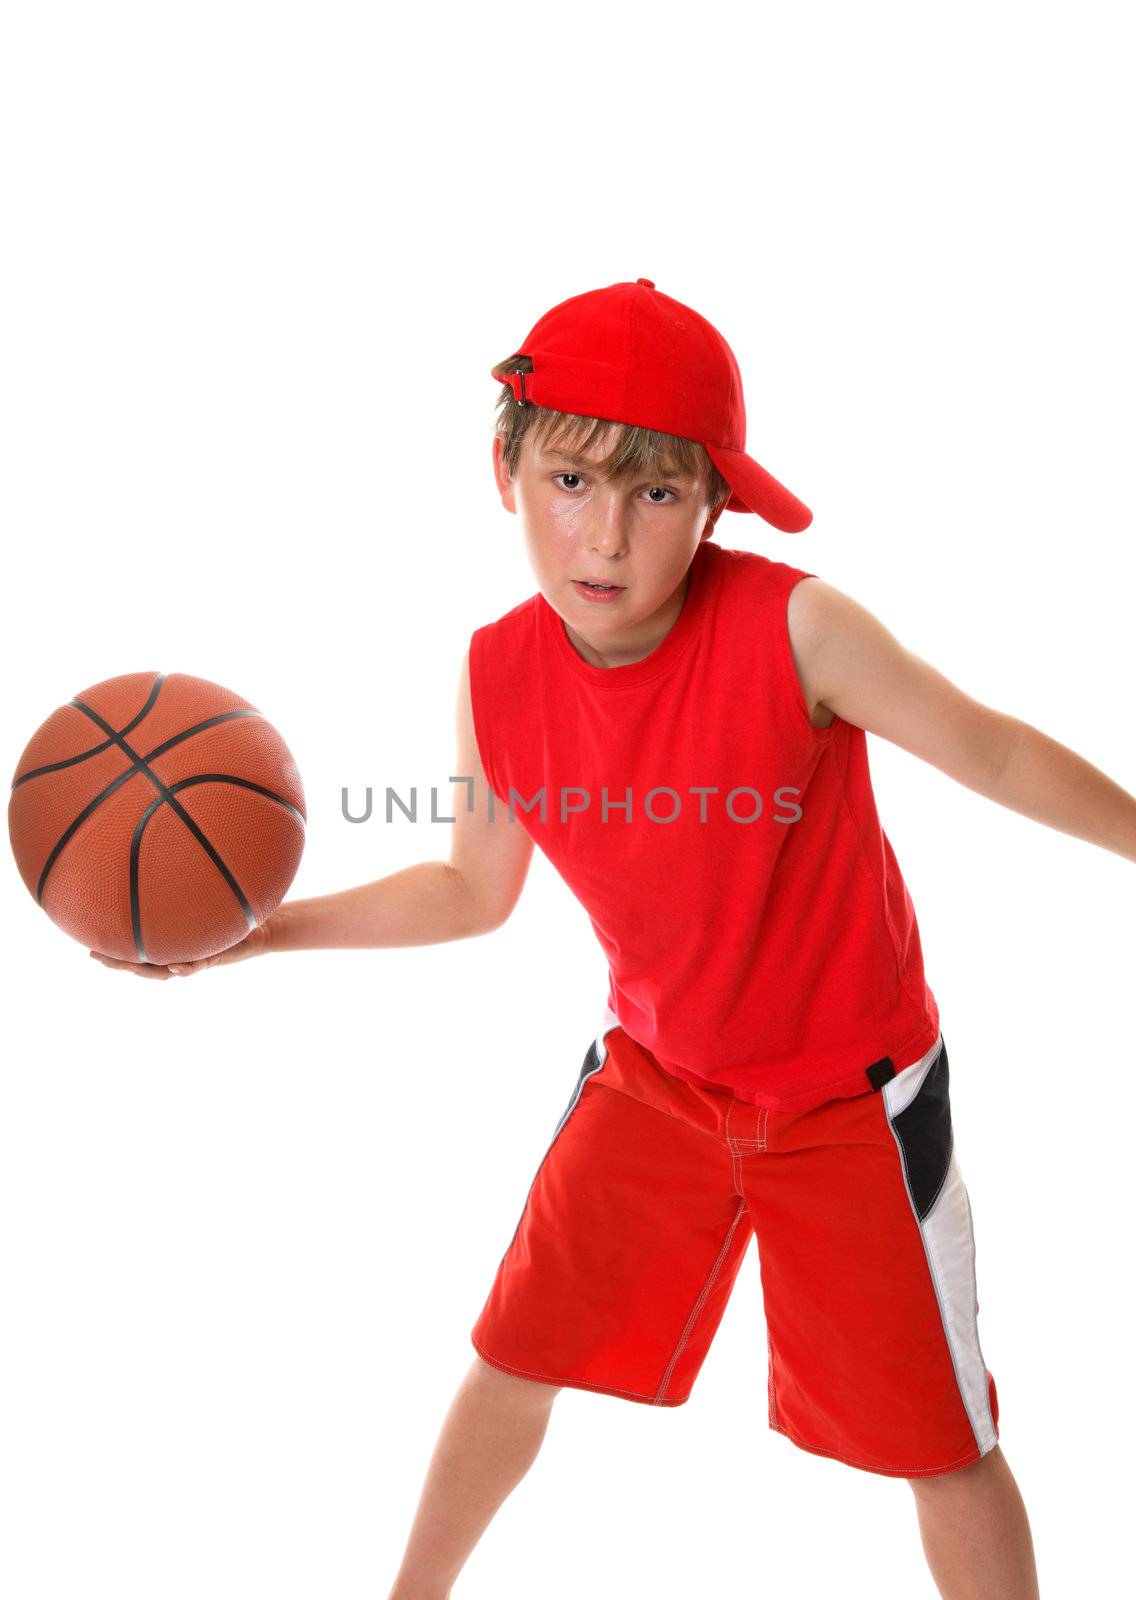 An active boy plays around with a basketball